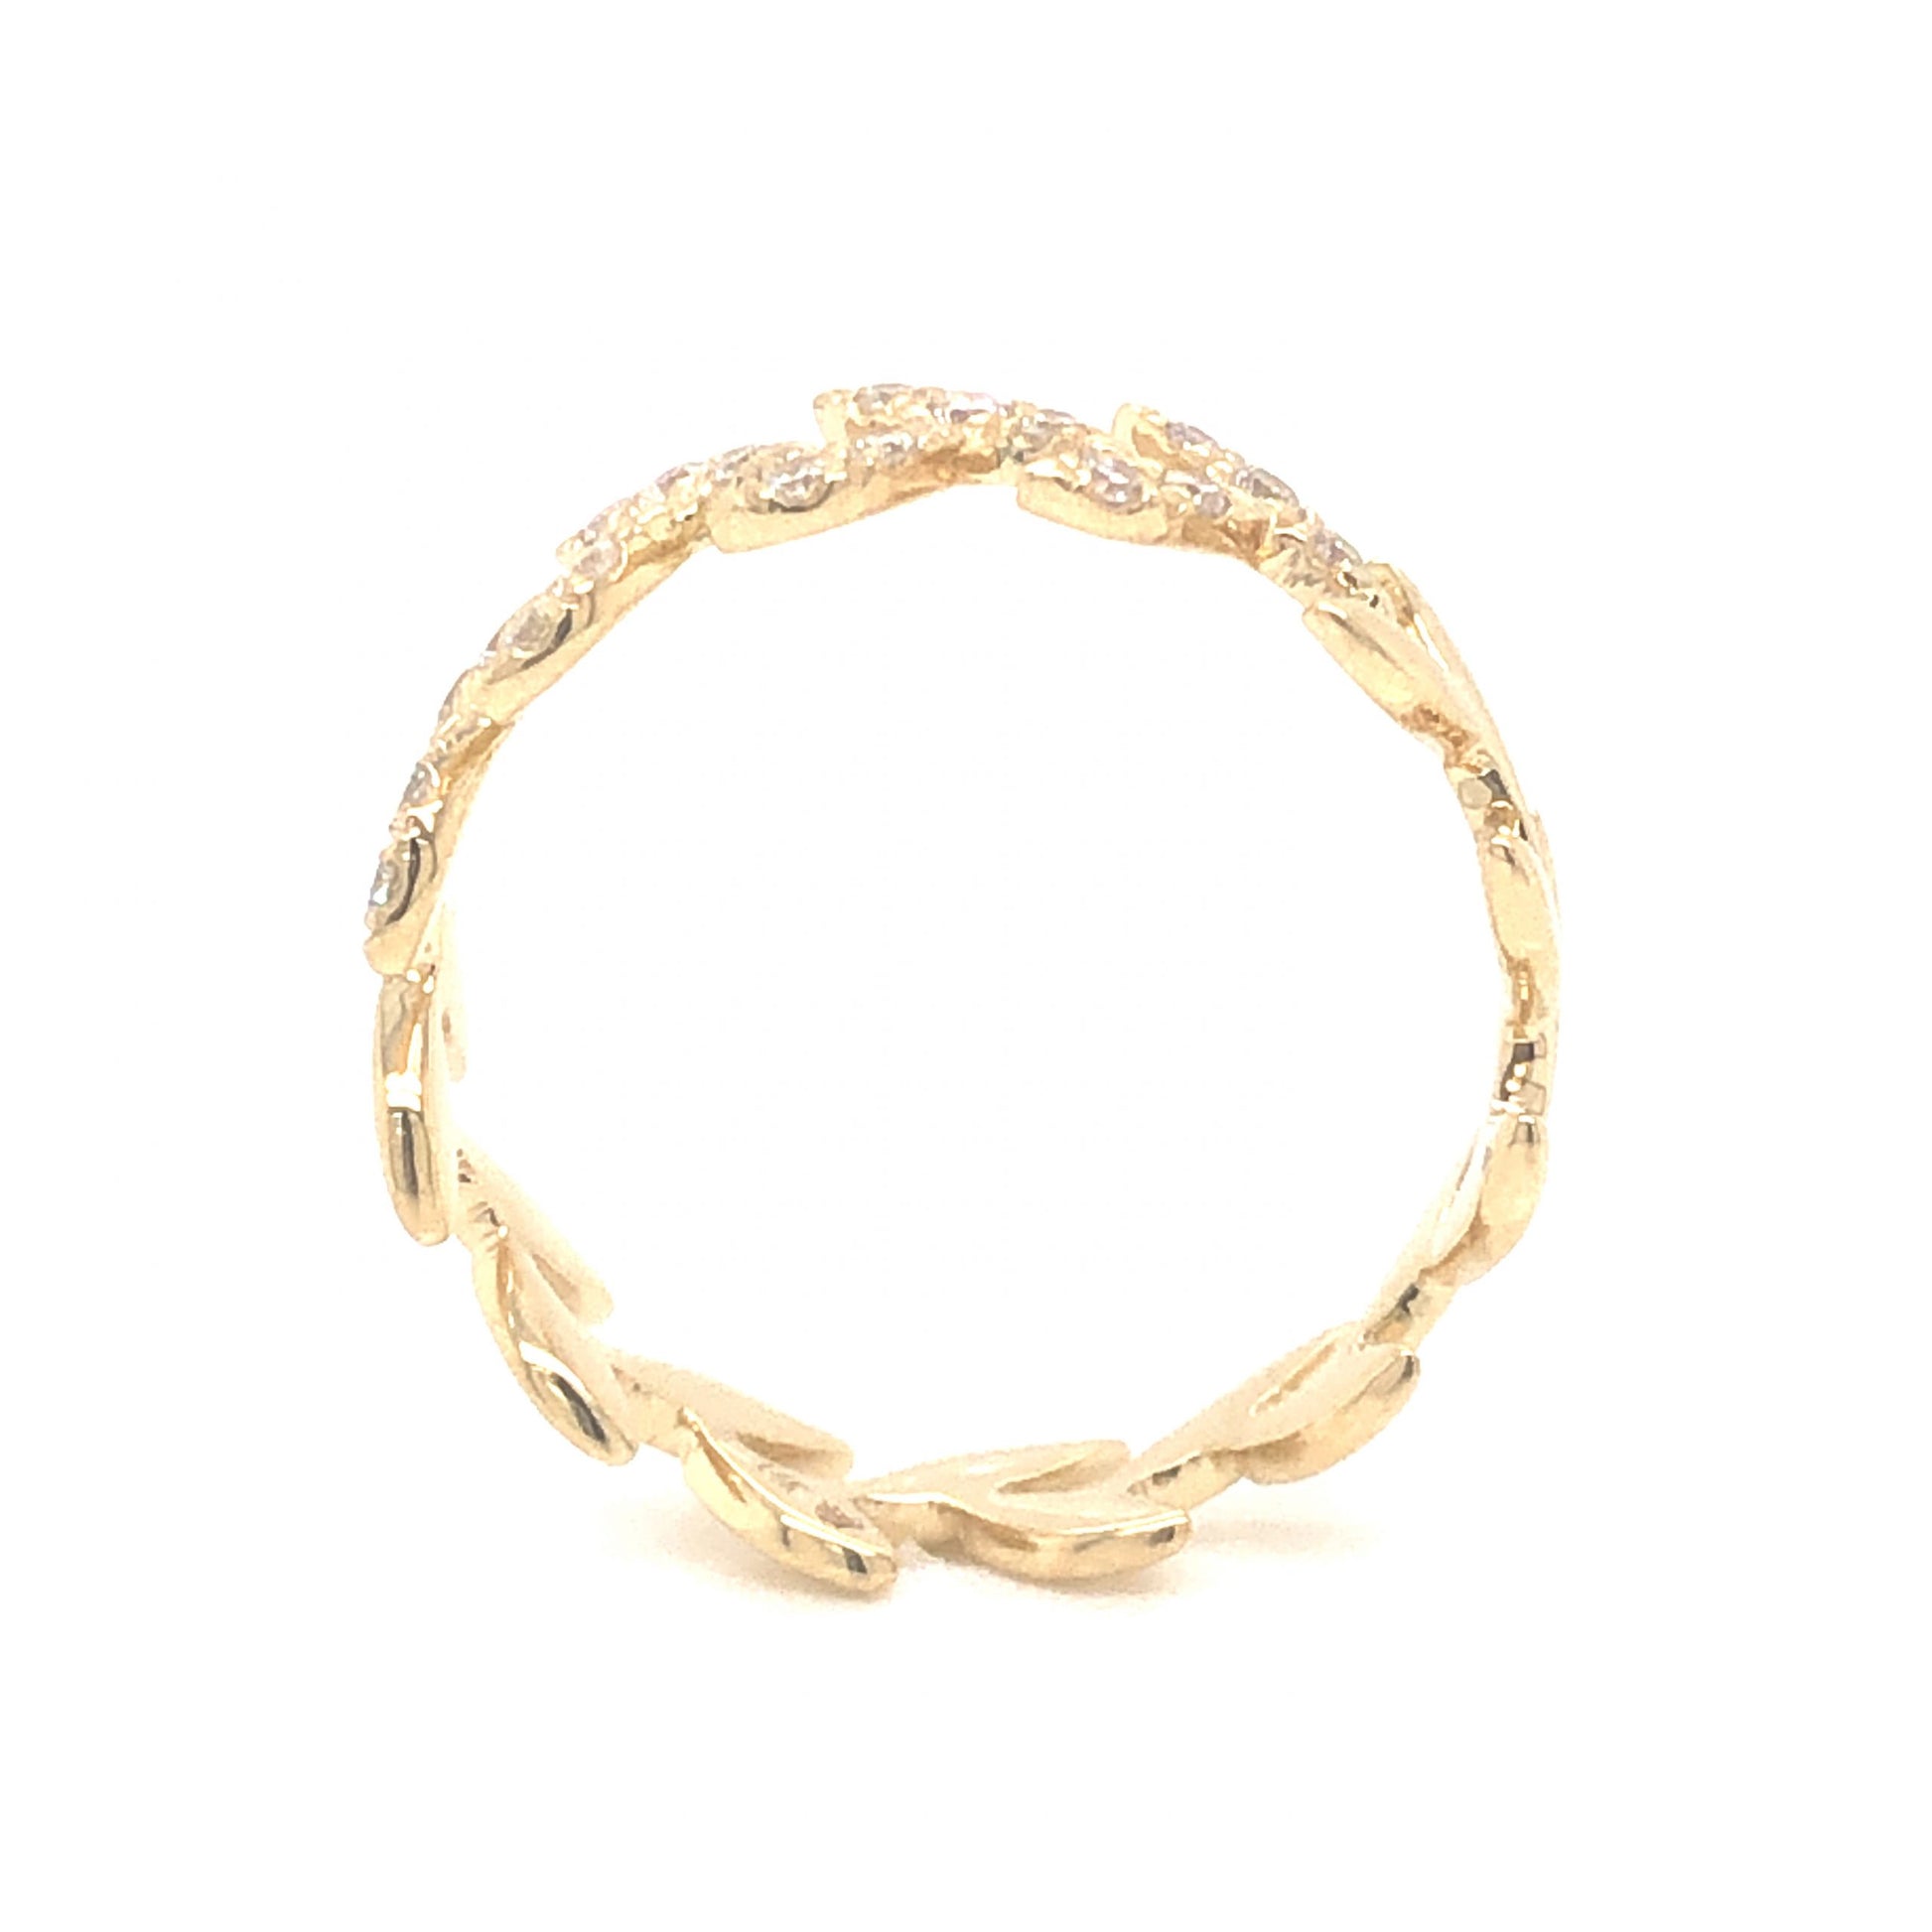 .20 Pave Diamond Vine Ring in 14k Yellow GoldComposition: 14 Karat Yellow GoldRing Size: 6.5Total Diamond Weight: .20 ctTotal Gram Weight: 1.8 gInscription: 14k 